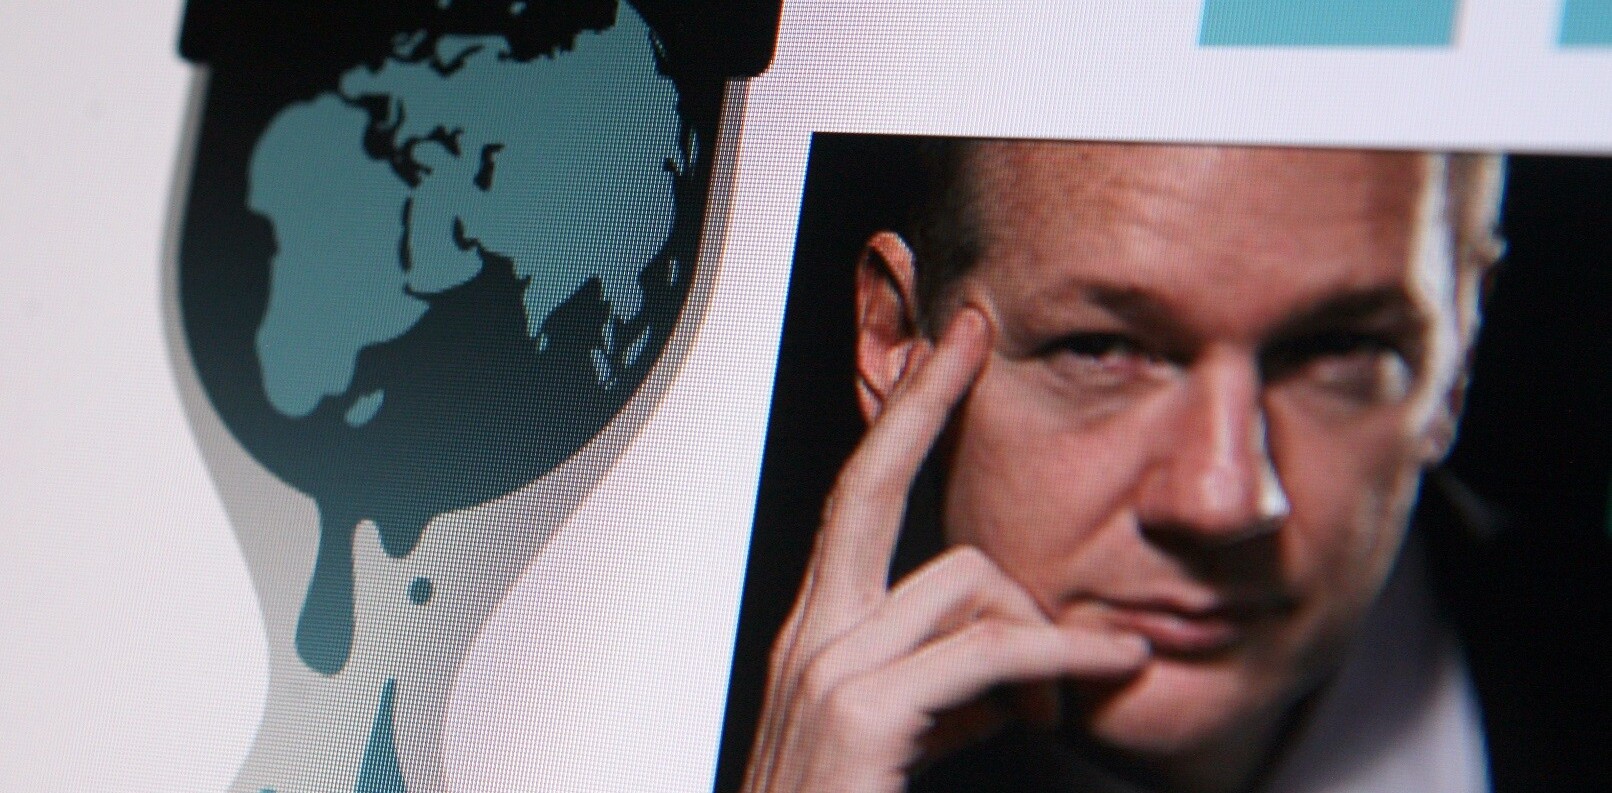 France says it has rejected an asylum application from Julian Assange